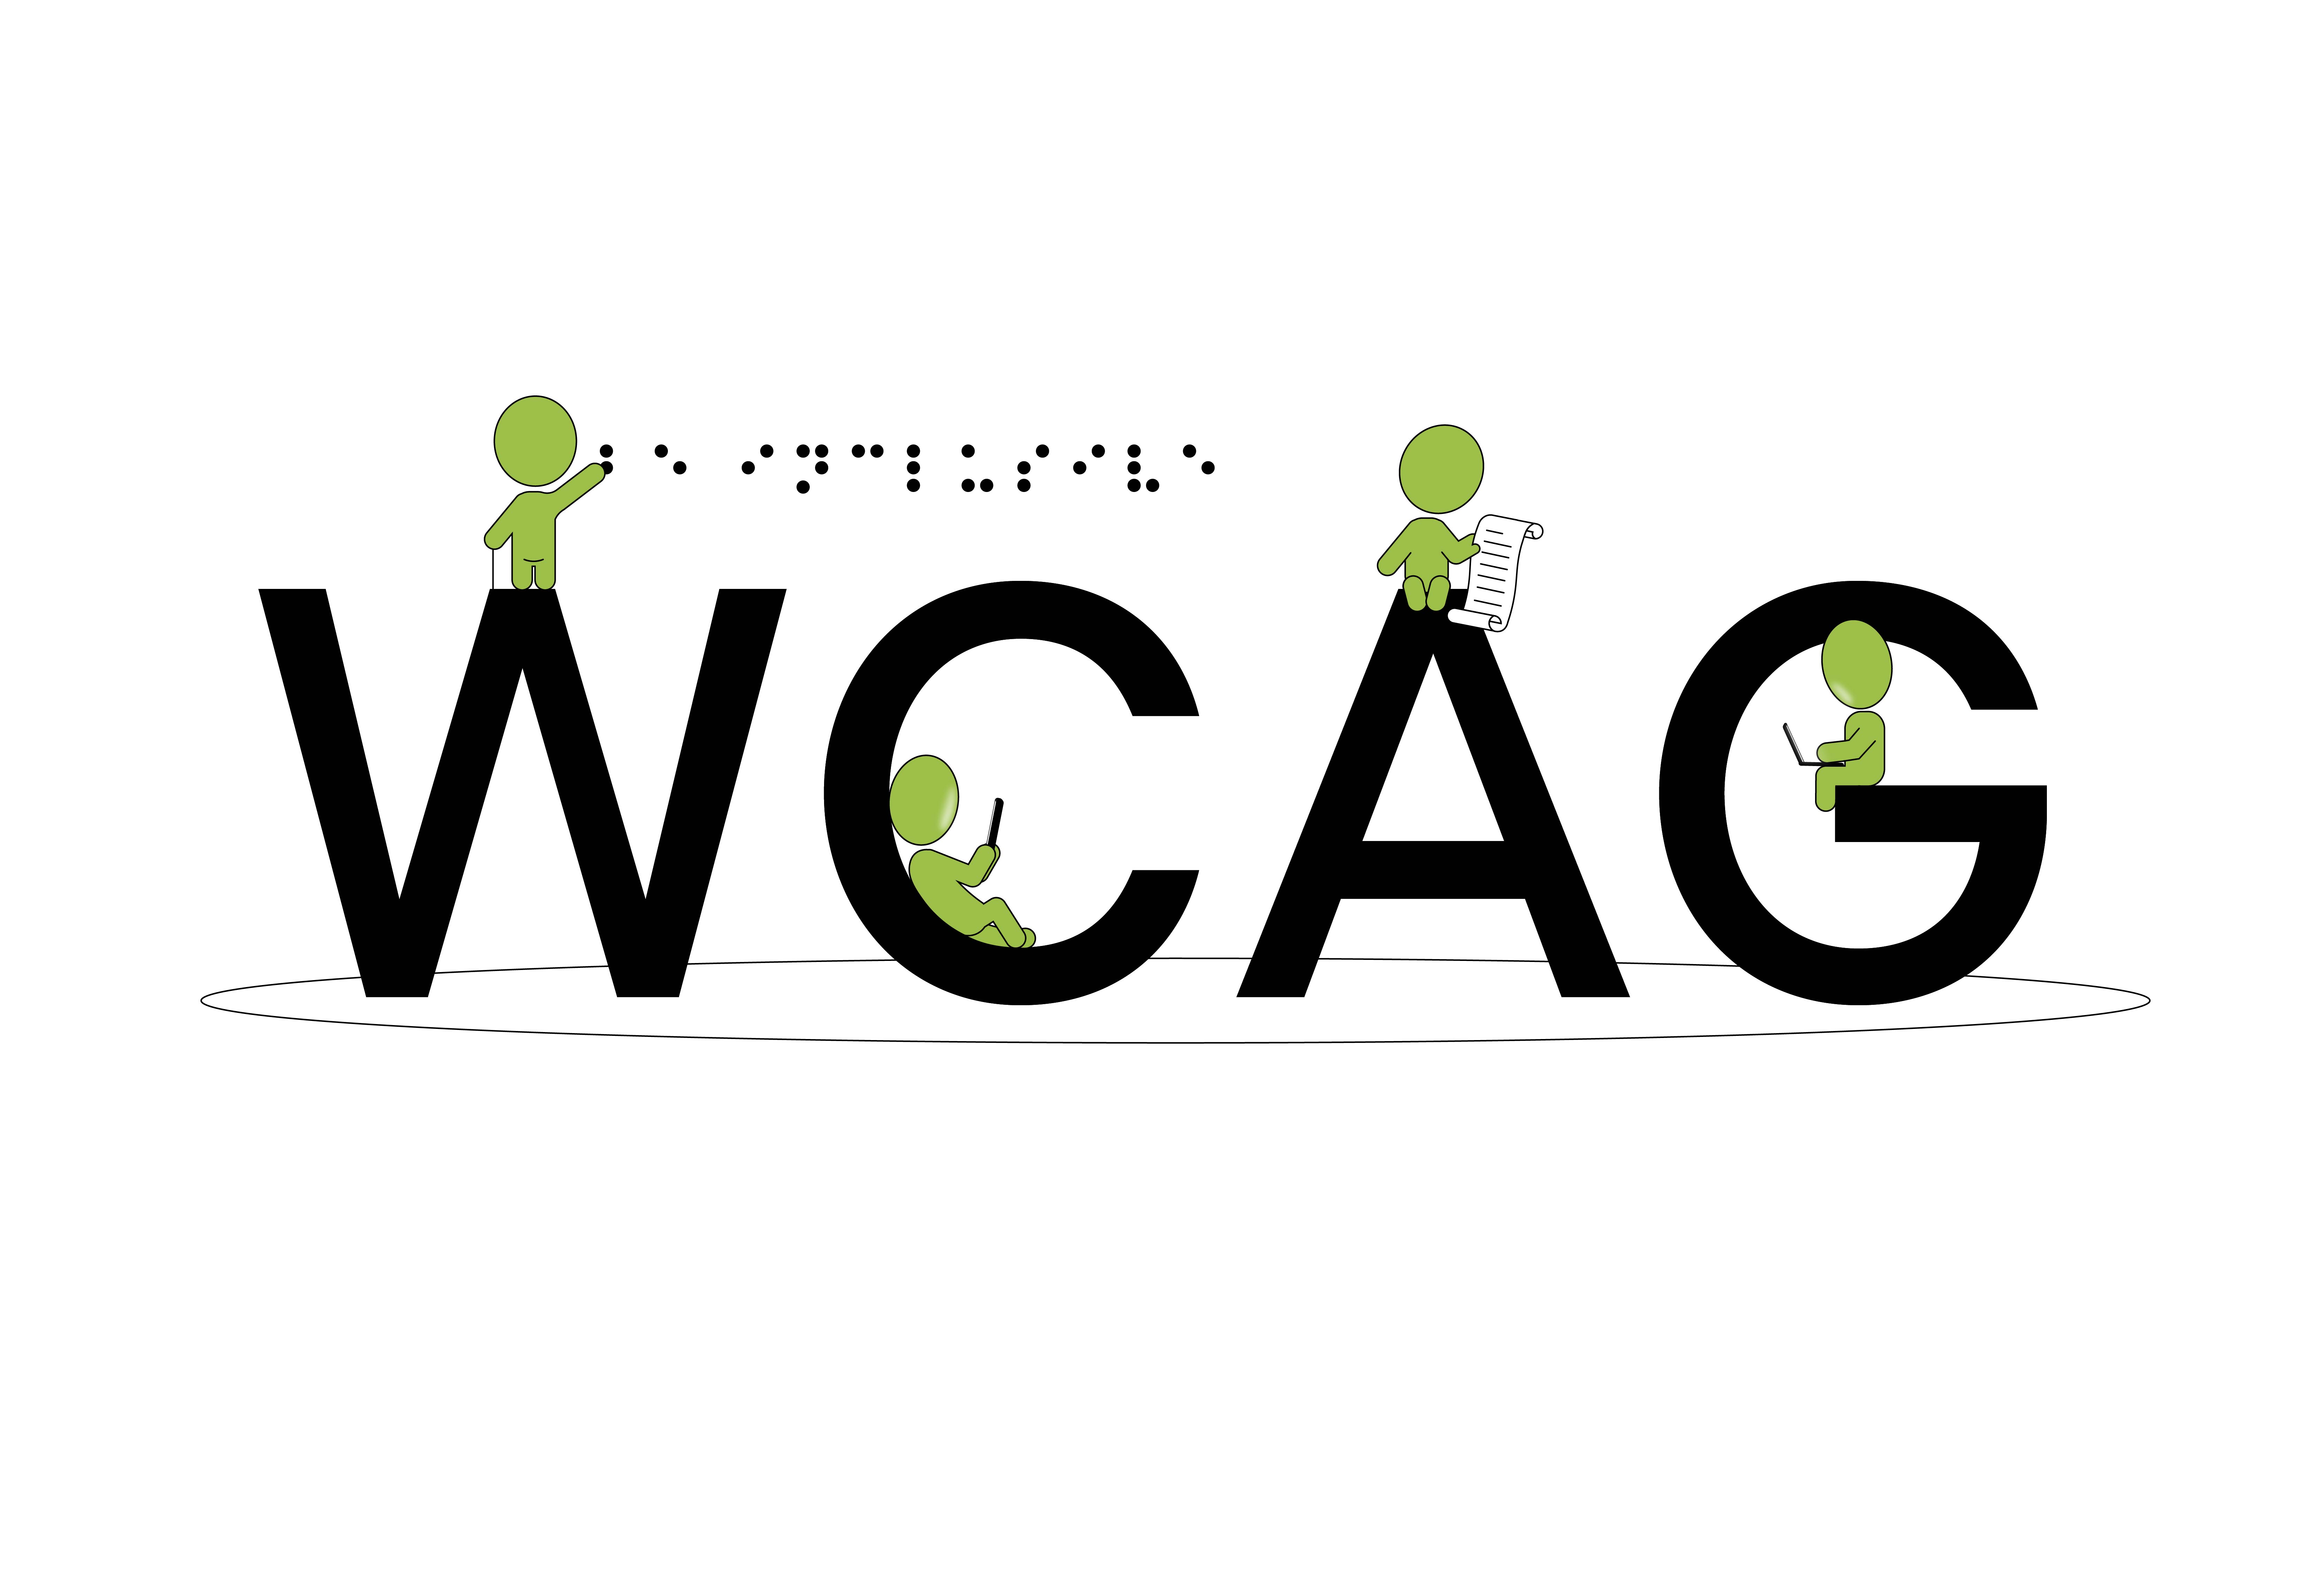 Digital illustration of multiple accessibility characters using varying computer and mobile devices while perched on giant letters that spell WCAG